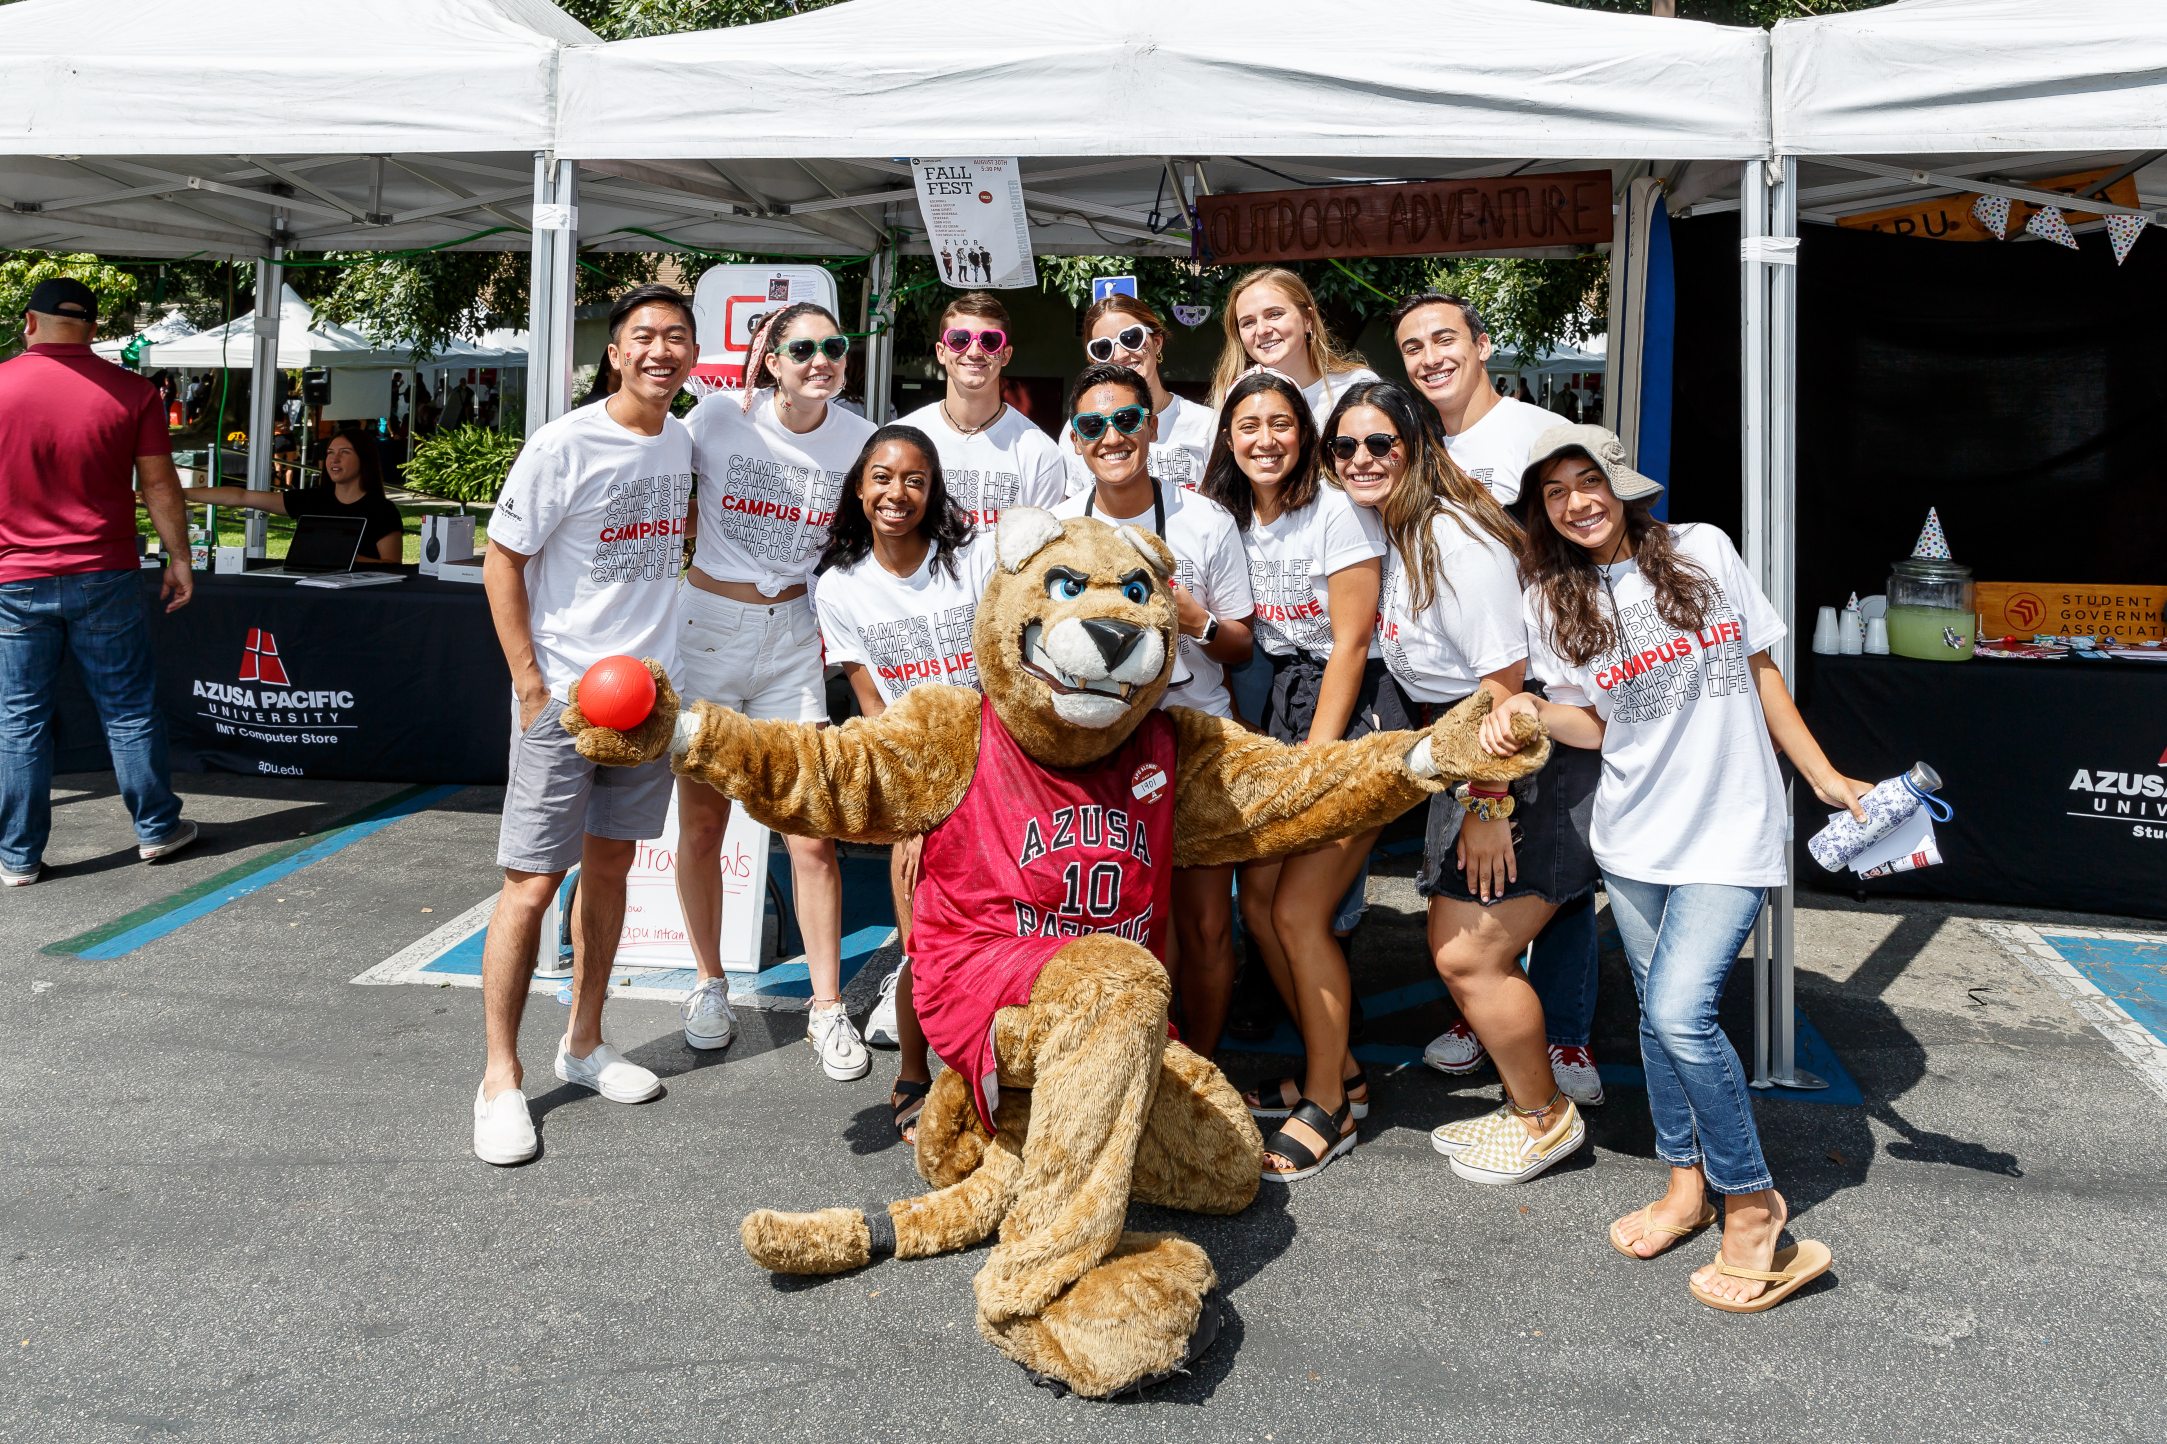 apu students smiling and gathering with cougar mascot during event